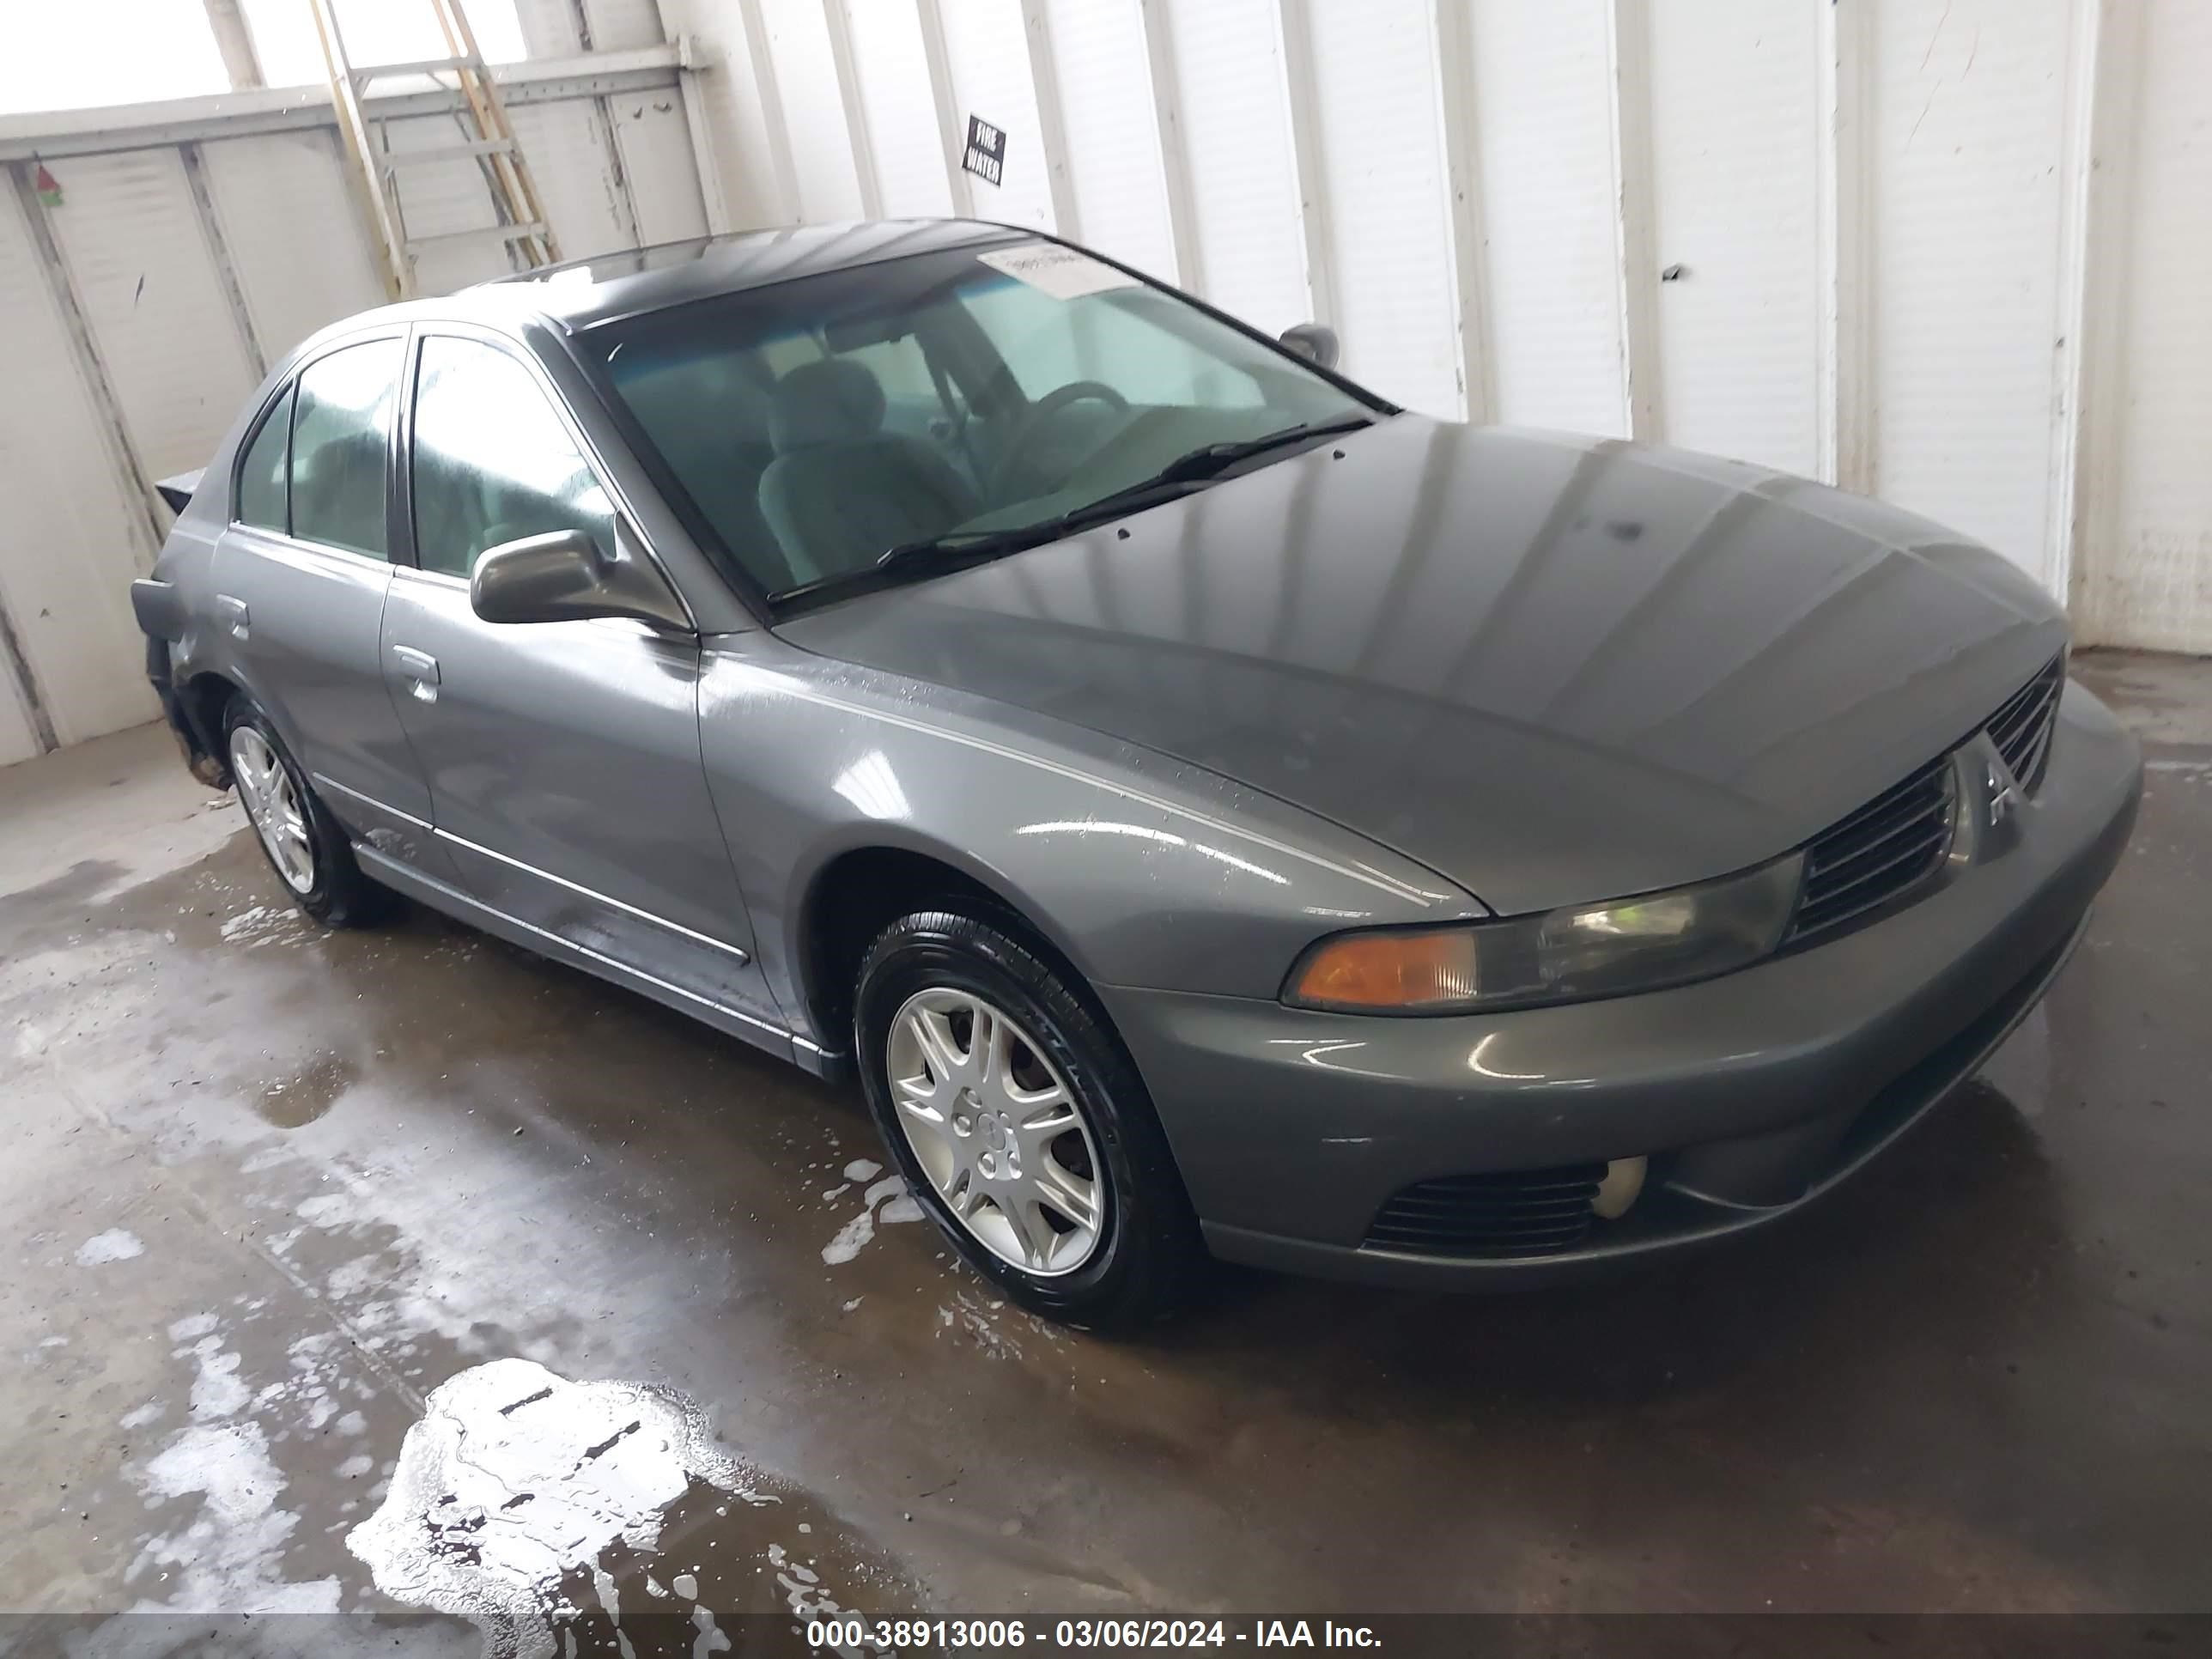 vin: 4A3AA46G52E062106 4A3AA46G52E062106 2002 mitsubishi galant 2400 for Sale in 27253, 171 Carden Road, Graham, USA